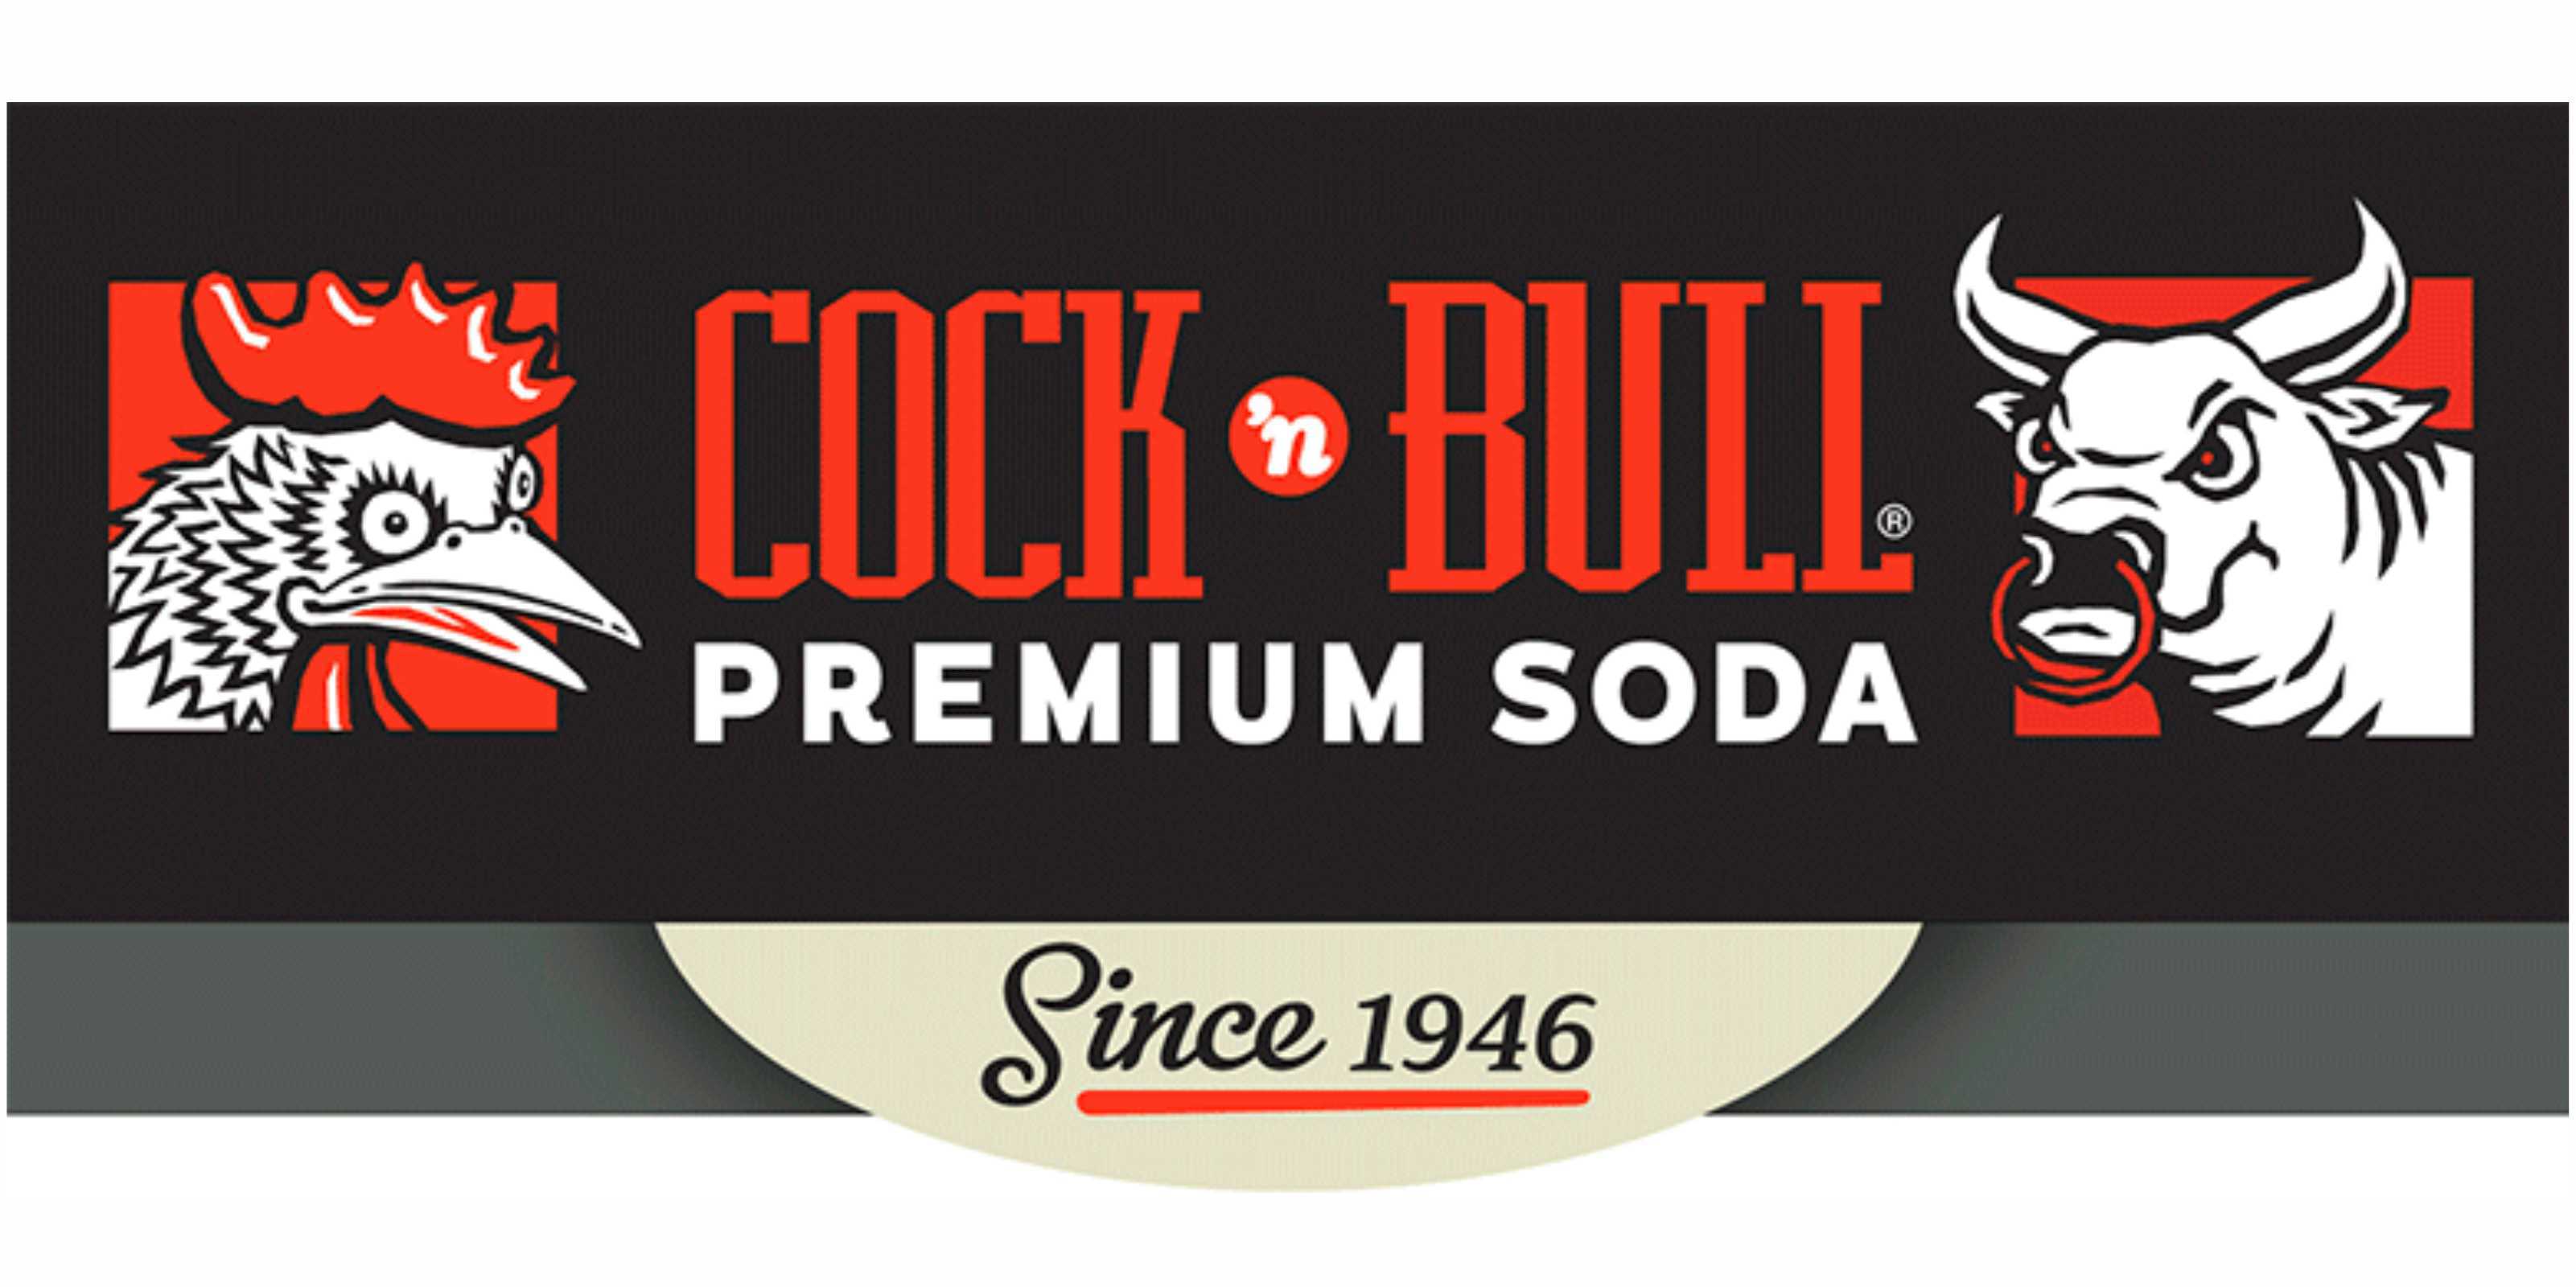 All cock and no bull